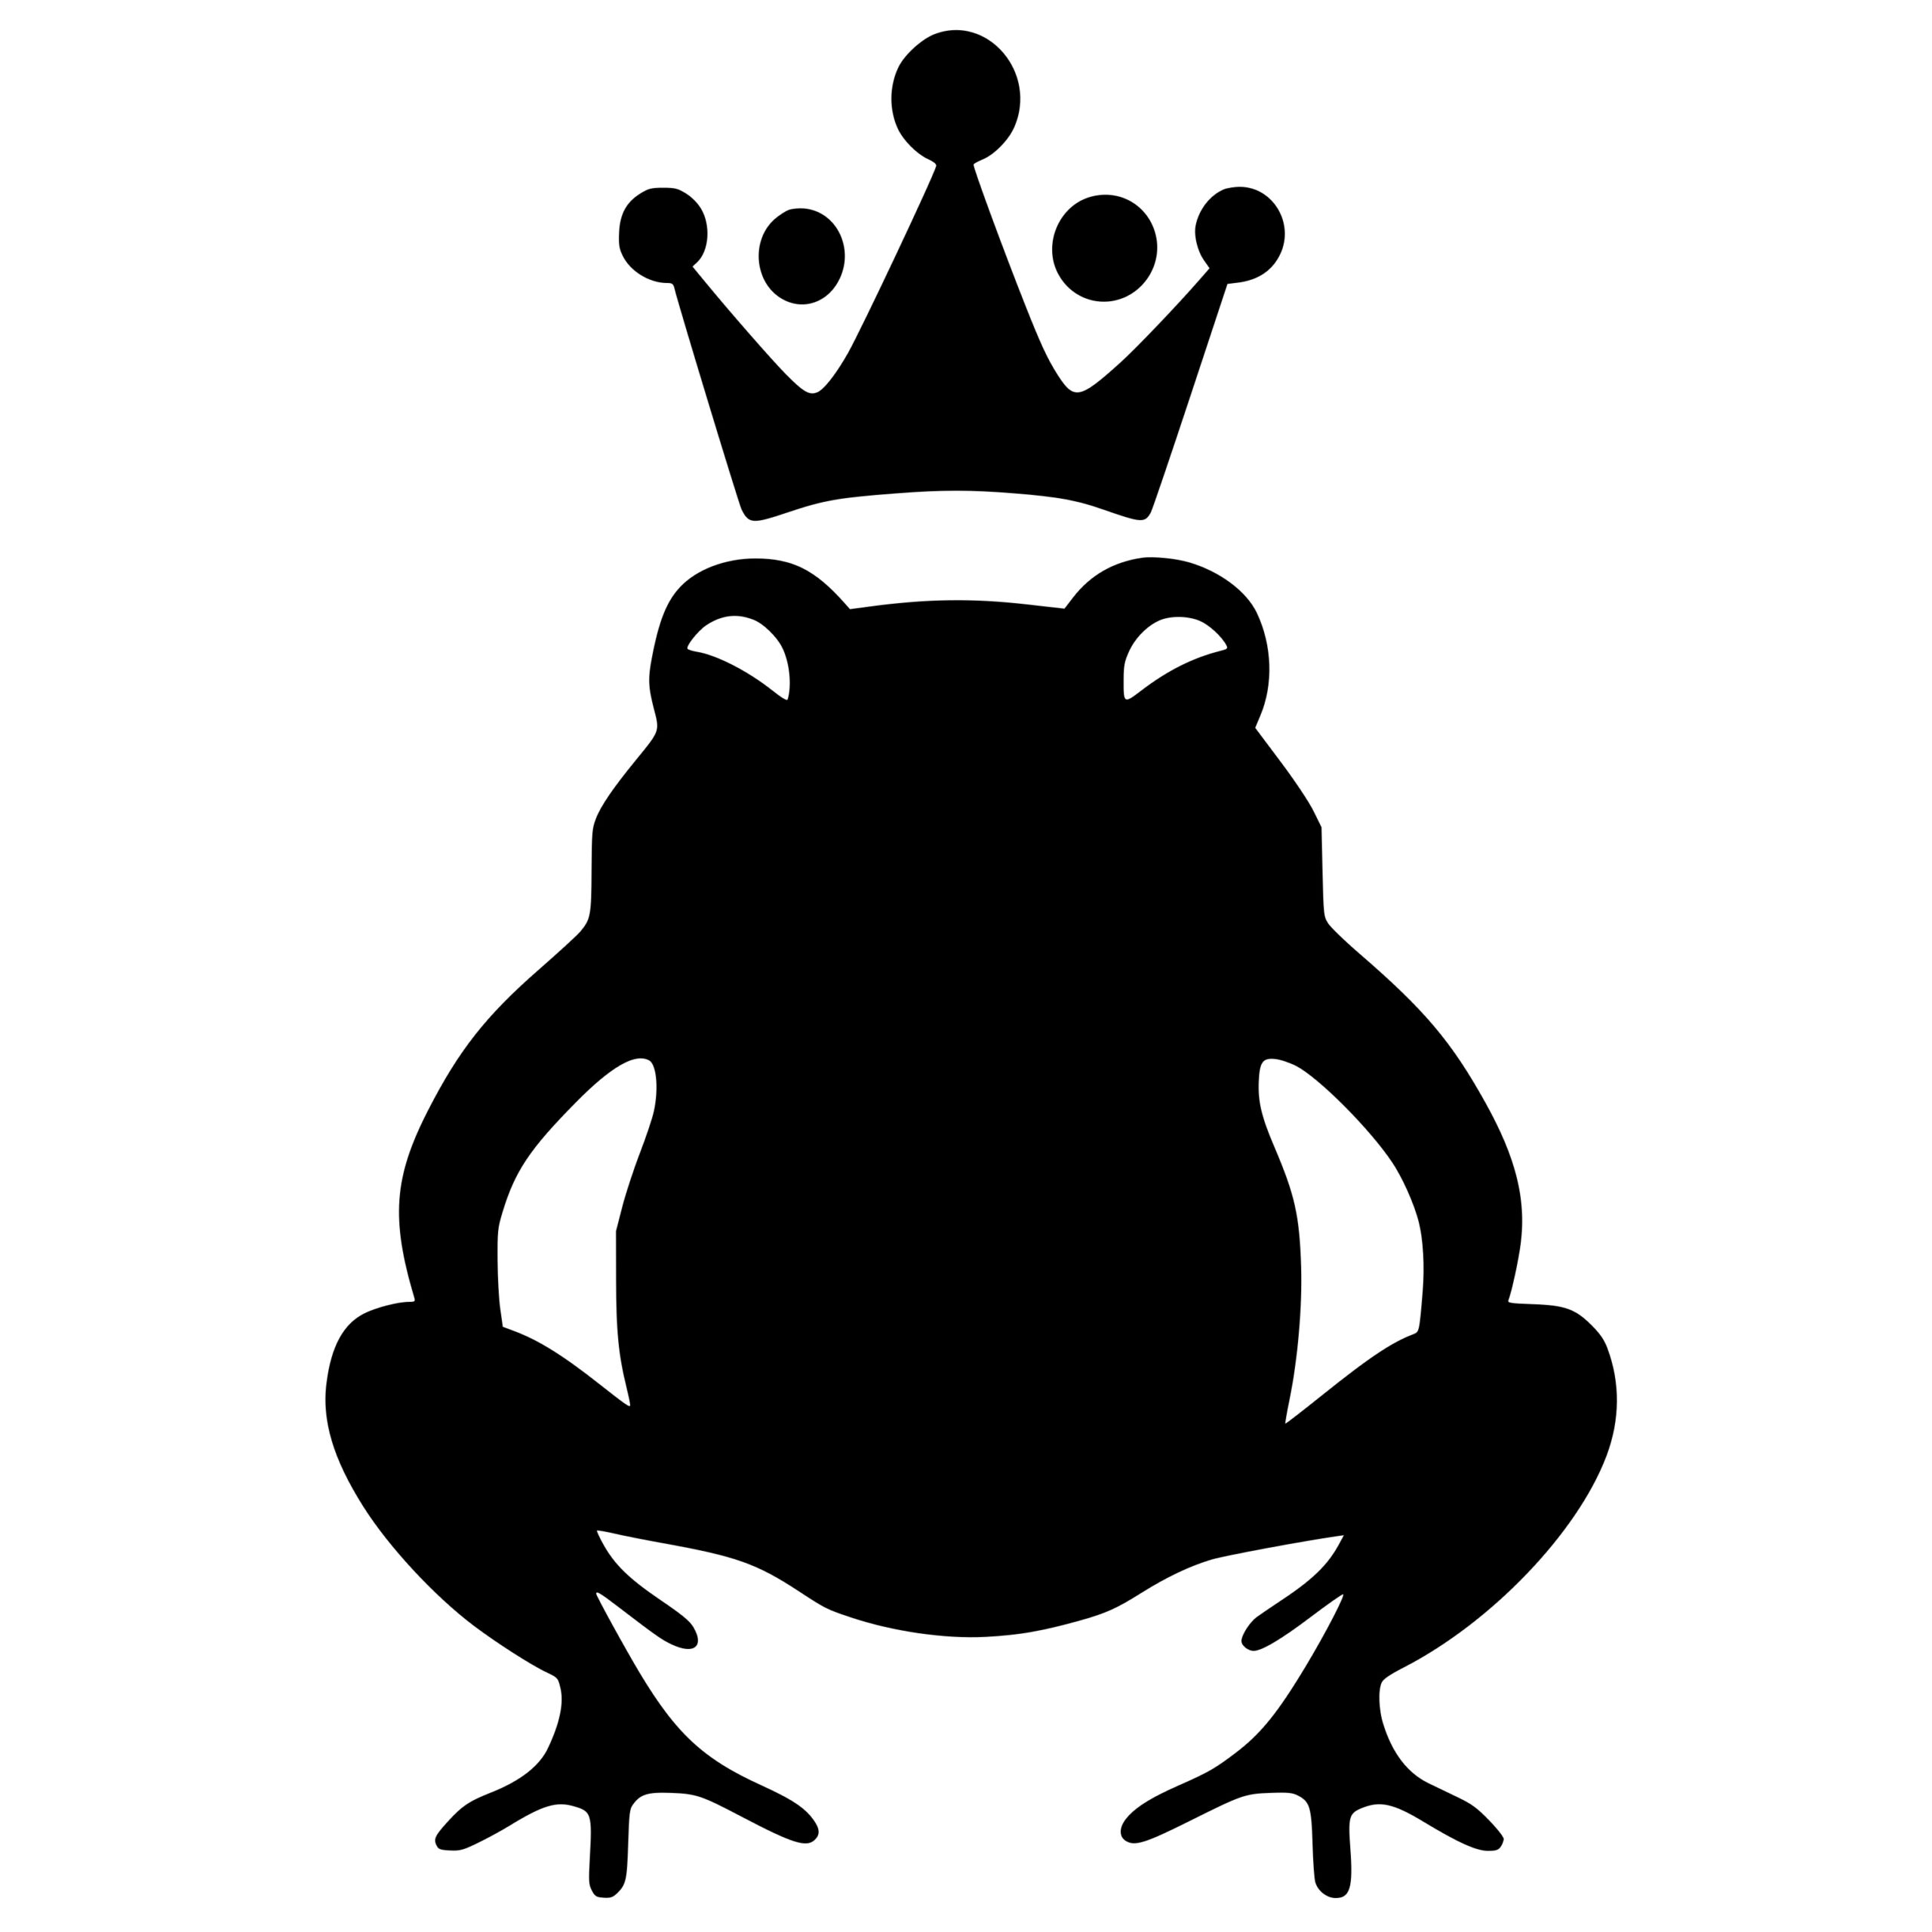 Enchanting Crowned Frog Clipart: Symbol of Creativity and